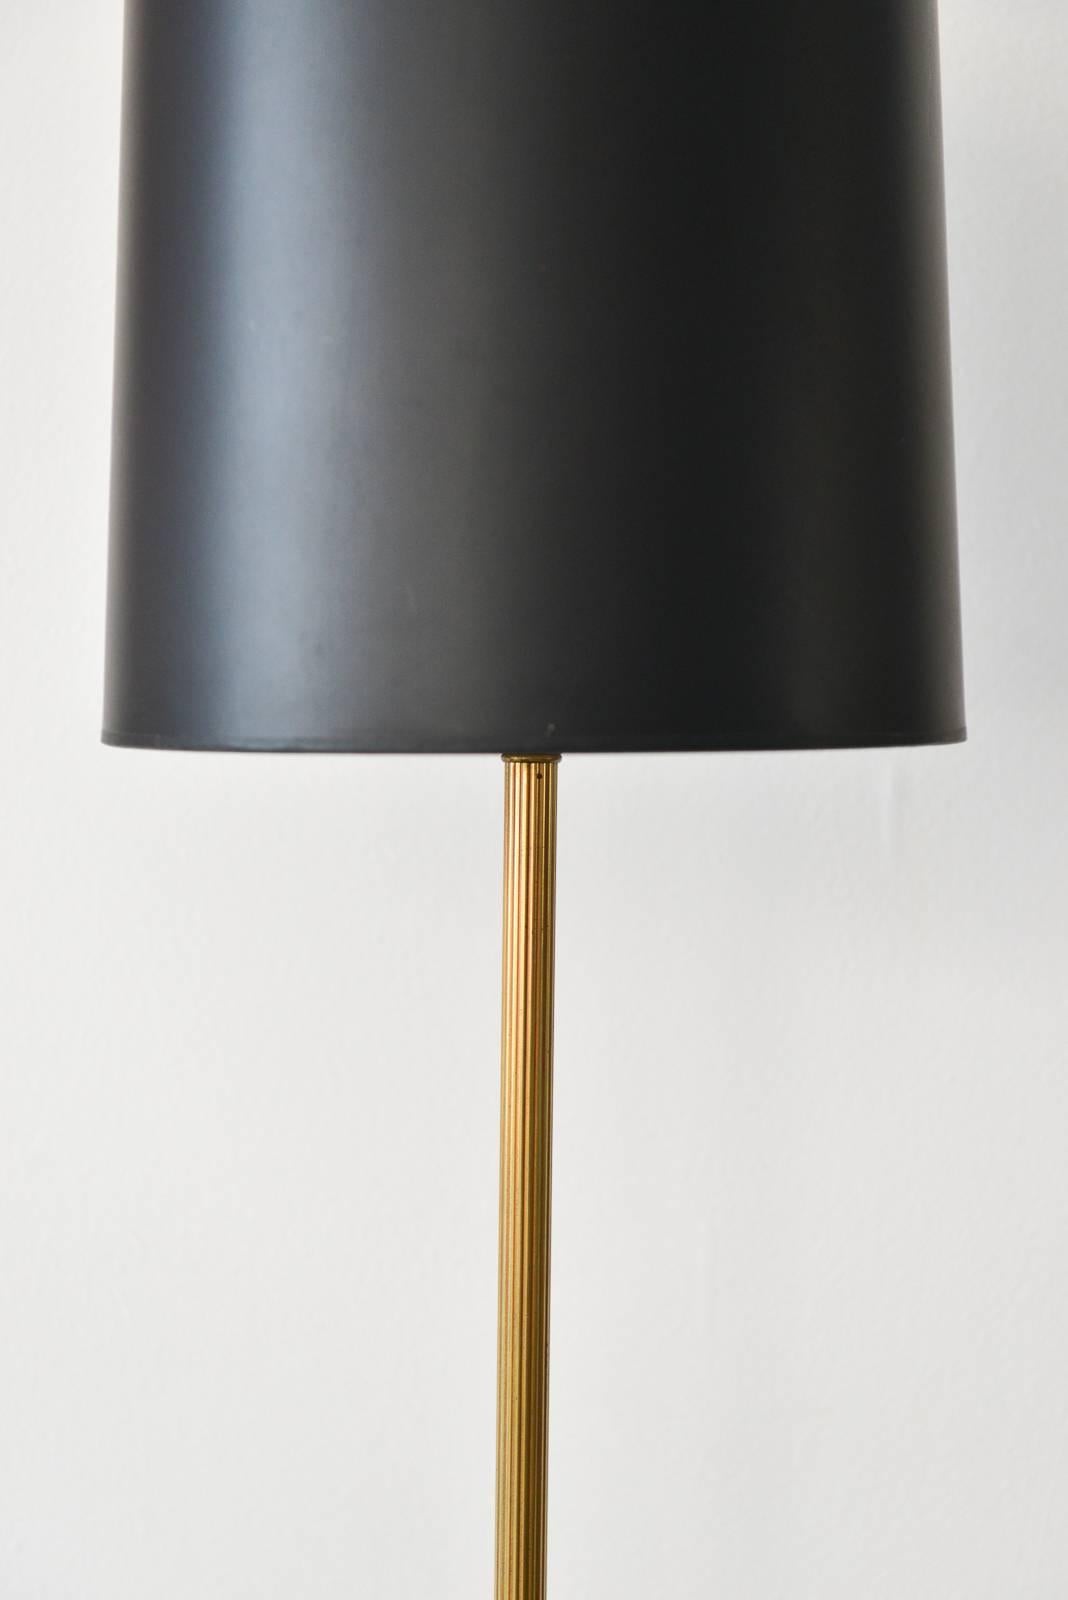 American Tripod Base Clover Floor Lamp with Table by Frederick Cooper, circa 1950